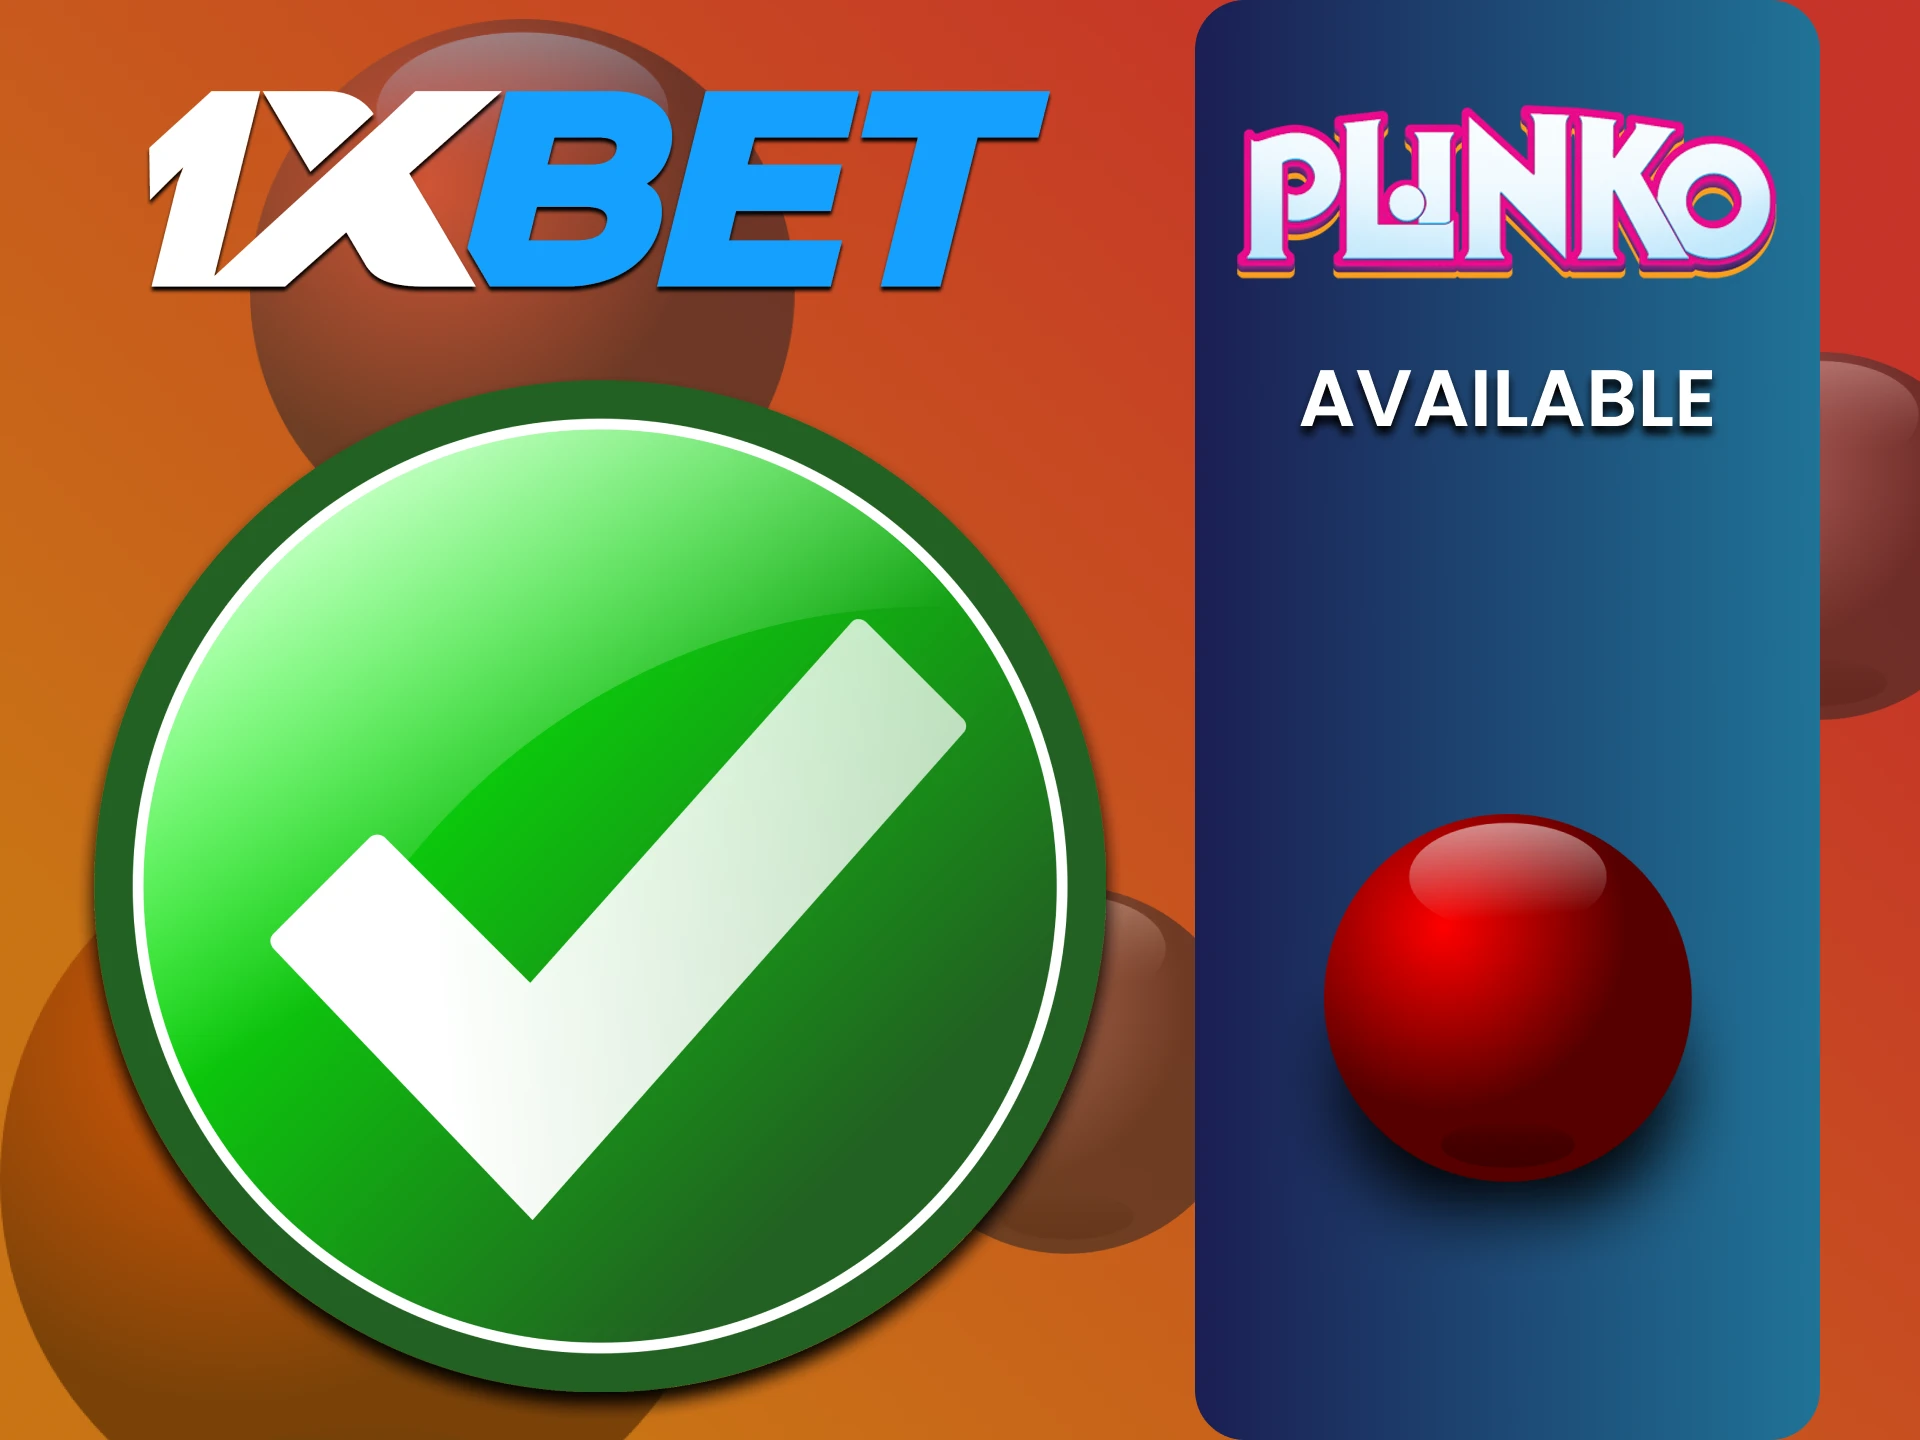 Choose your Plinko option from those available on the 1xbet website.